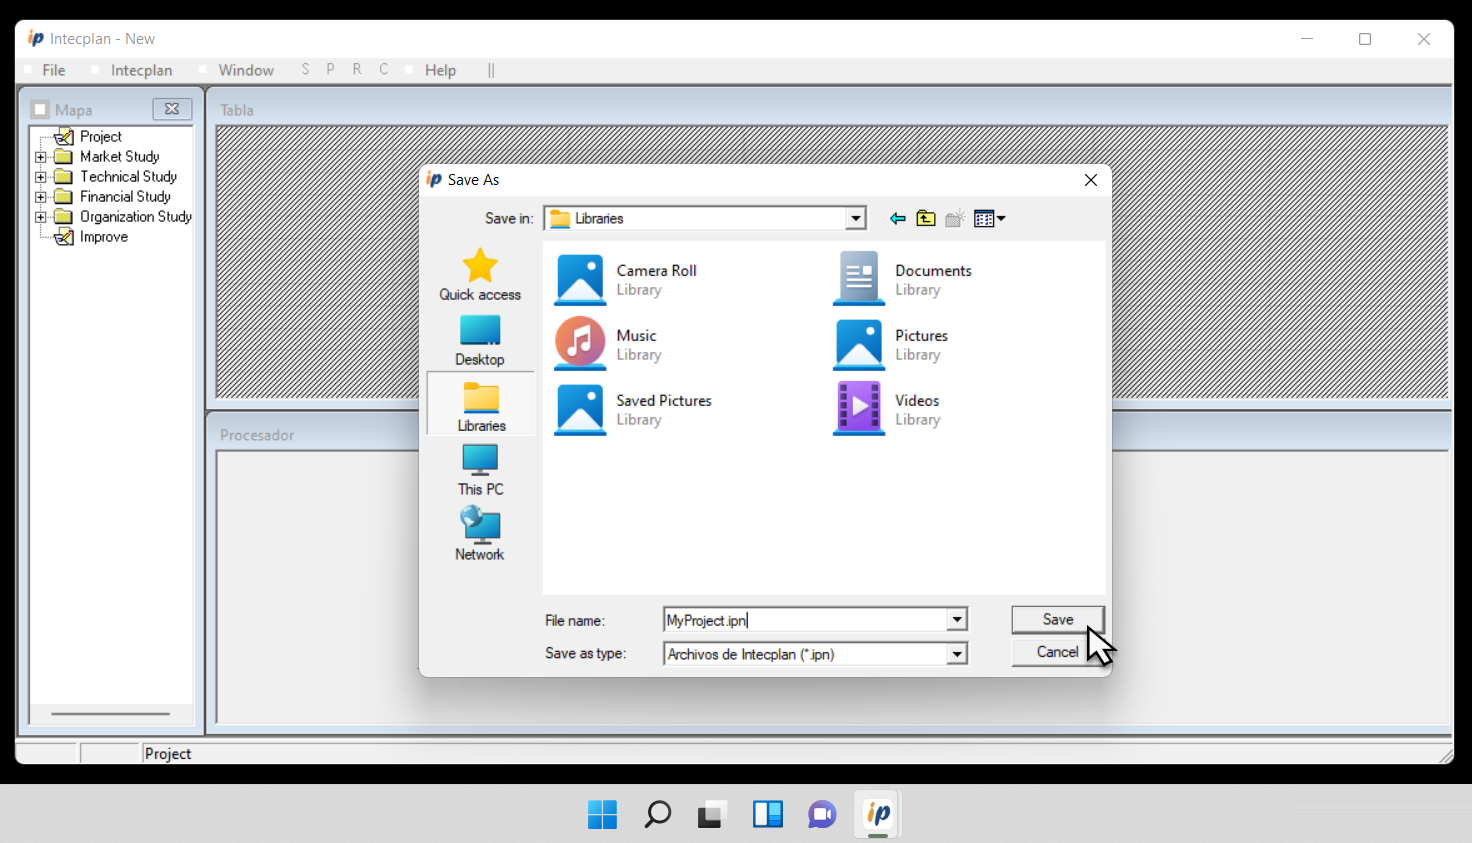 Save dialog. Save your files *.ipn  Intecplan resides on your PC, not in the cloud, so no one has access to your projects.